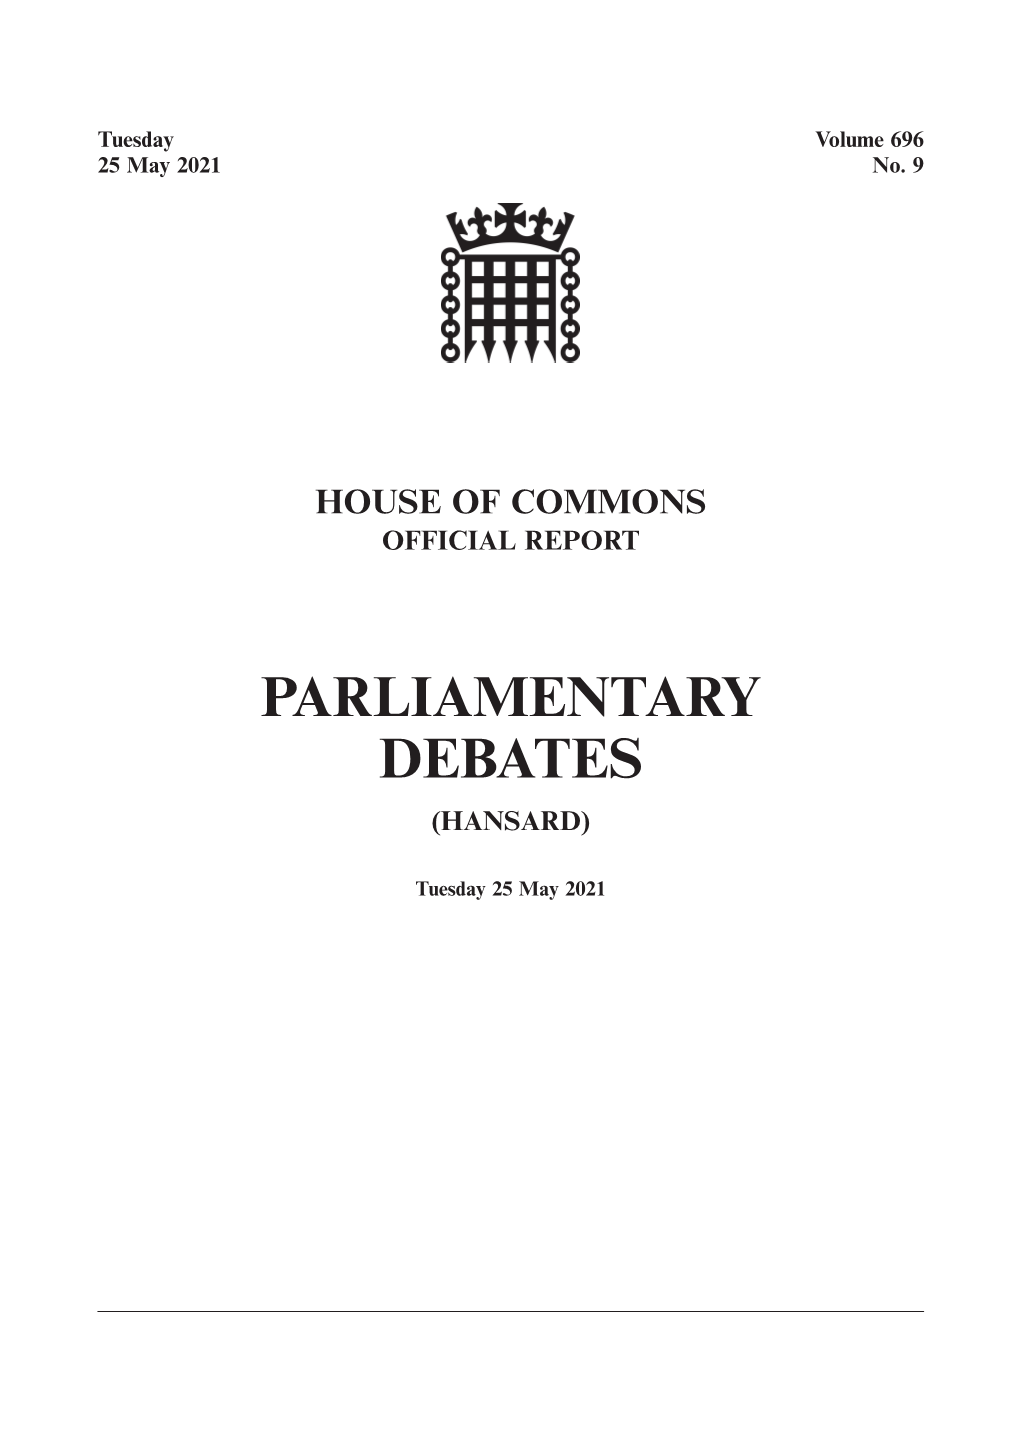 Whole Day Download the Hansard Record of the Entire Day in PDF Format. PDF File, 1.06